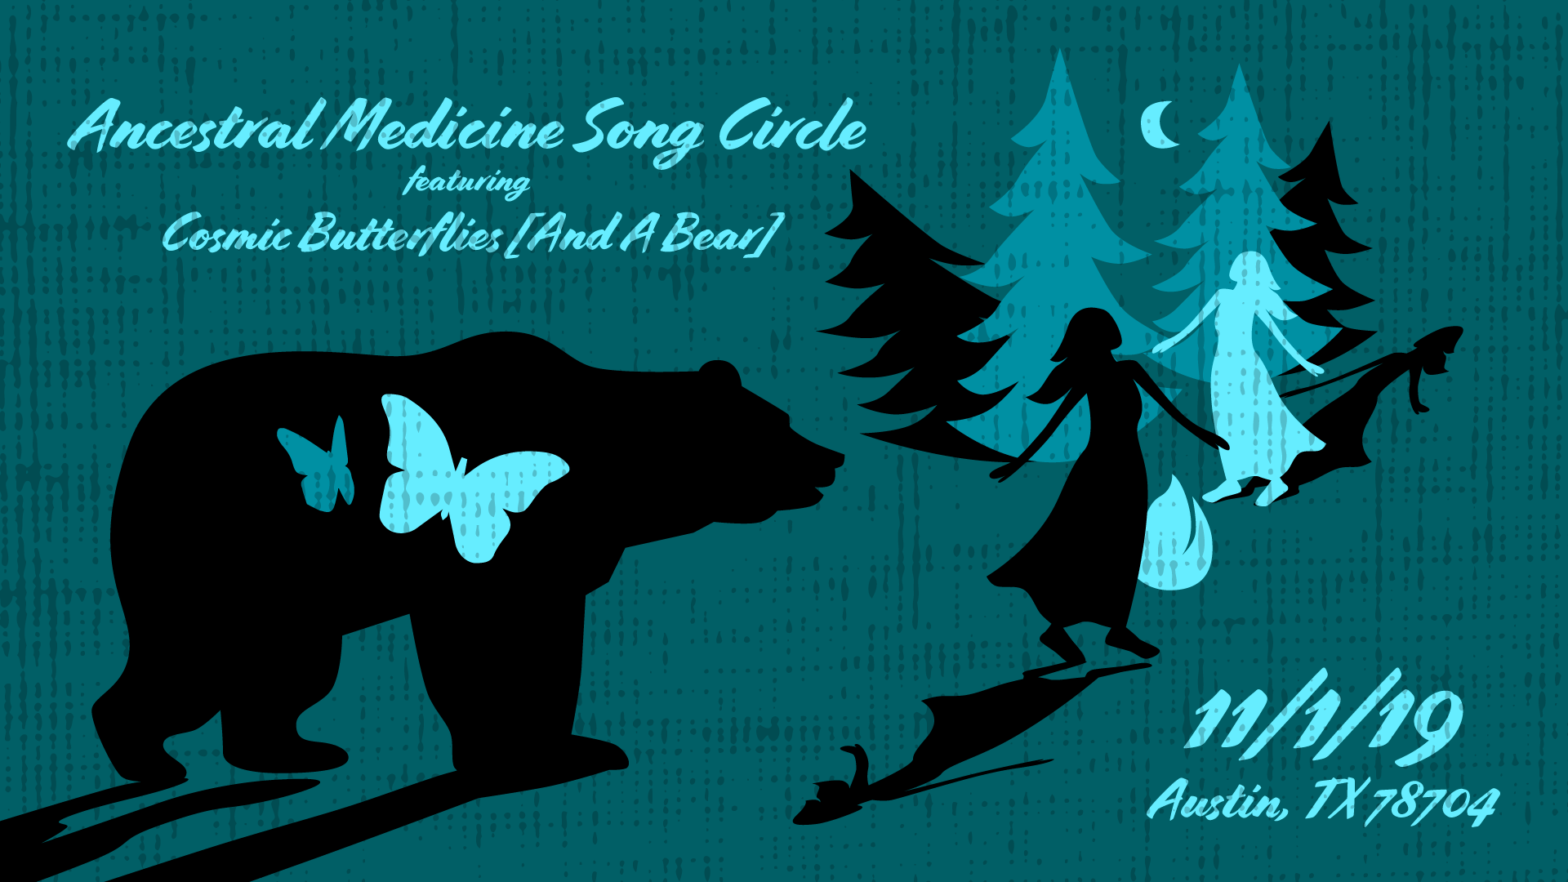 Ancestral Medicine Song Circle feat. Cosmic Butterflies And A Bear